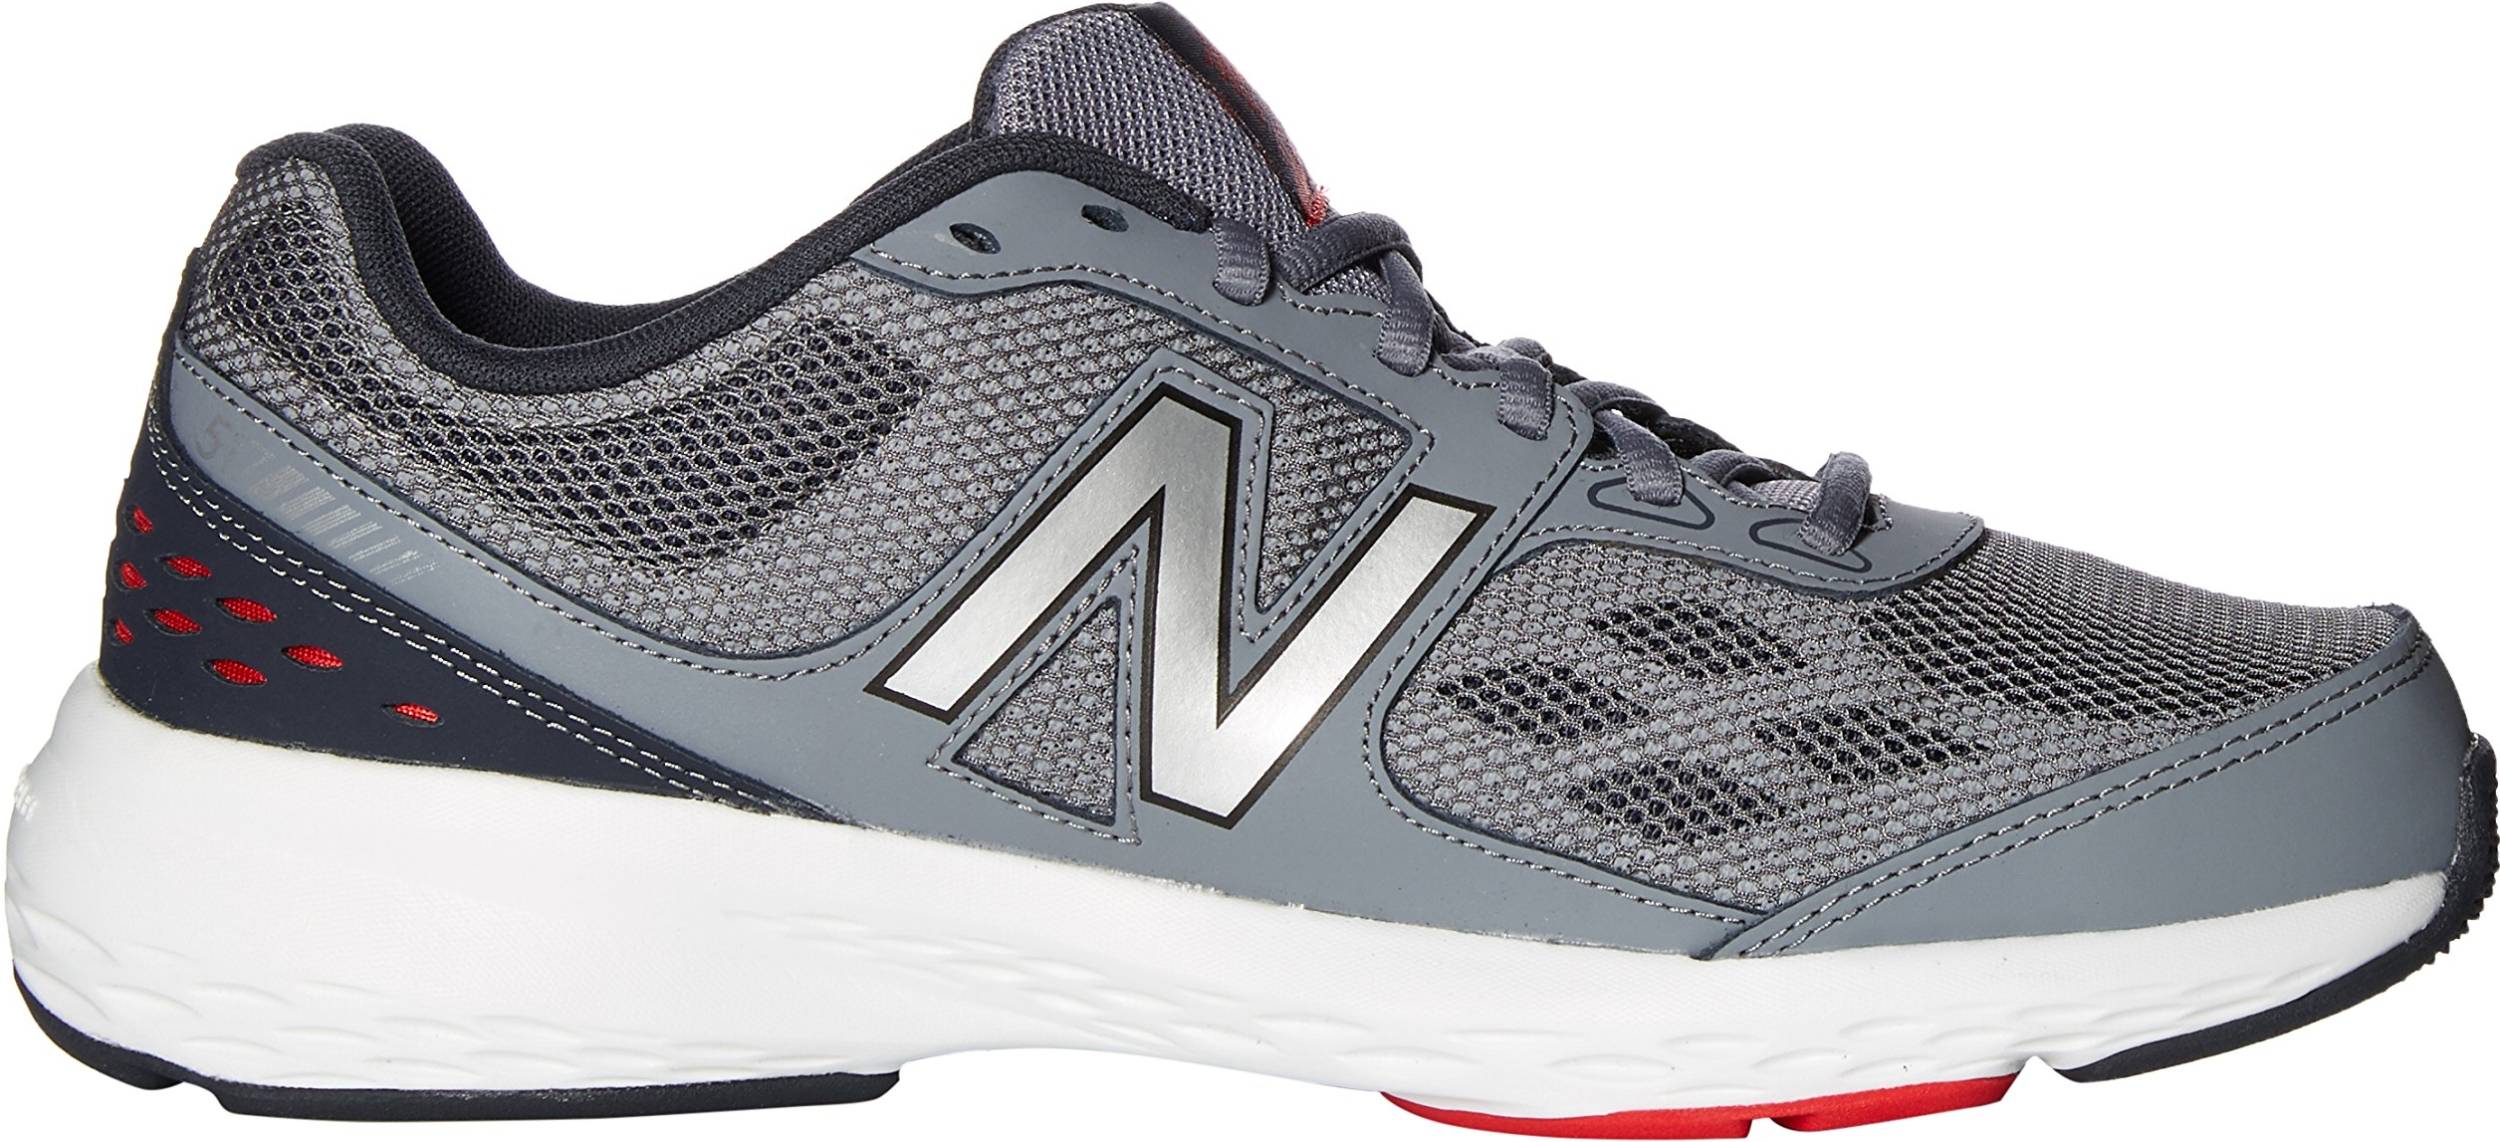 Only $40 + Review of New Balance 517 